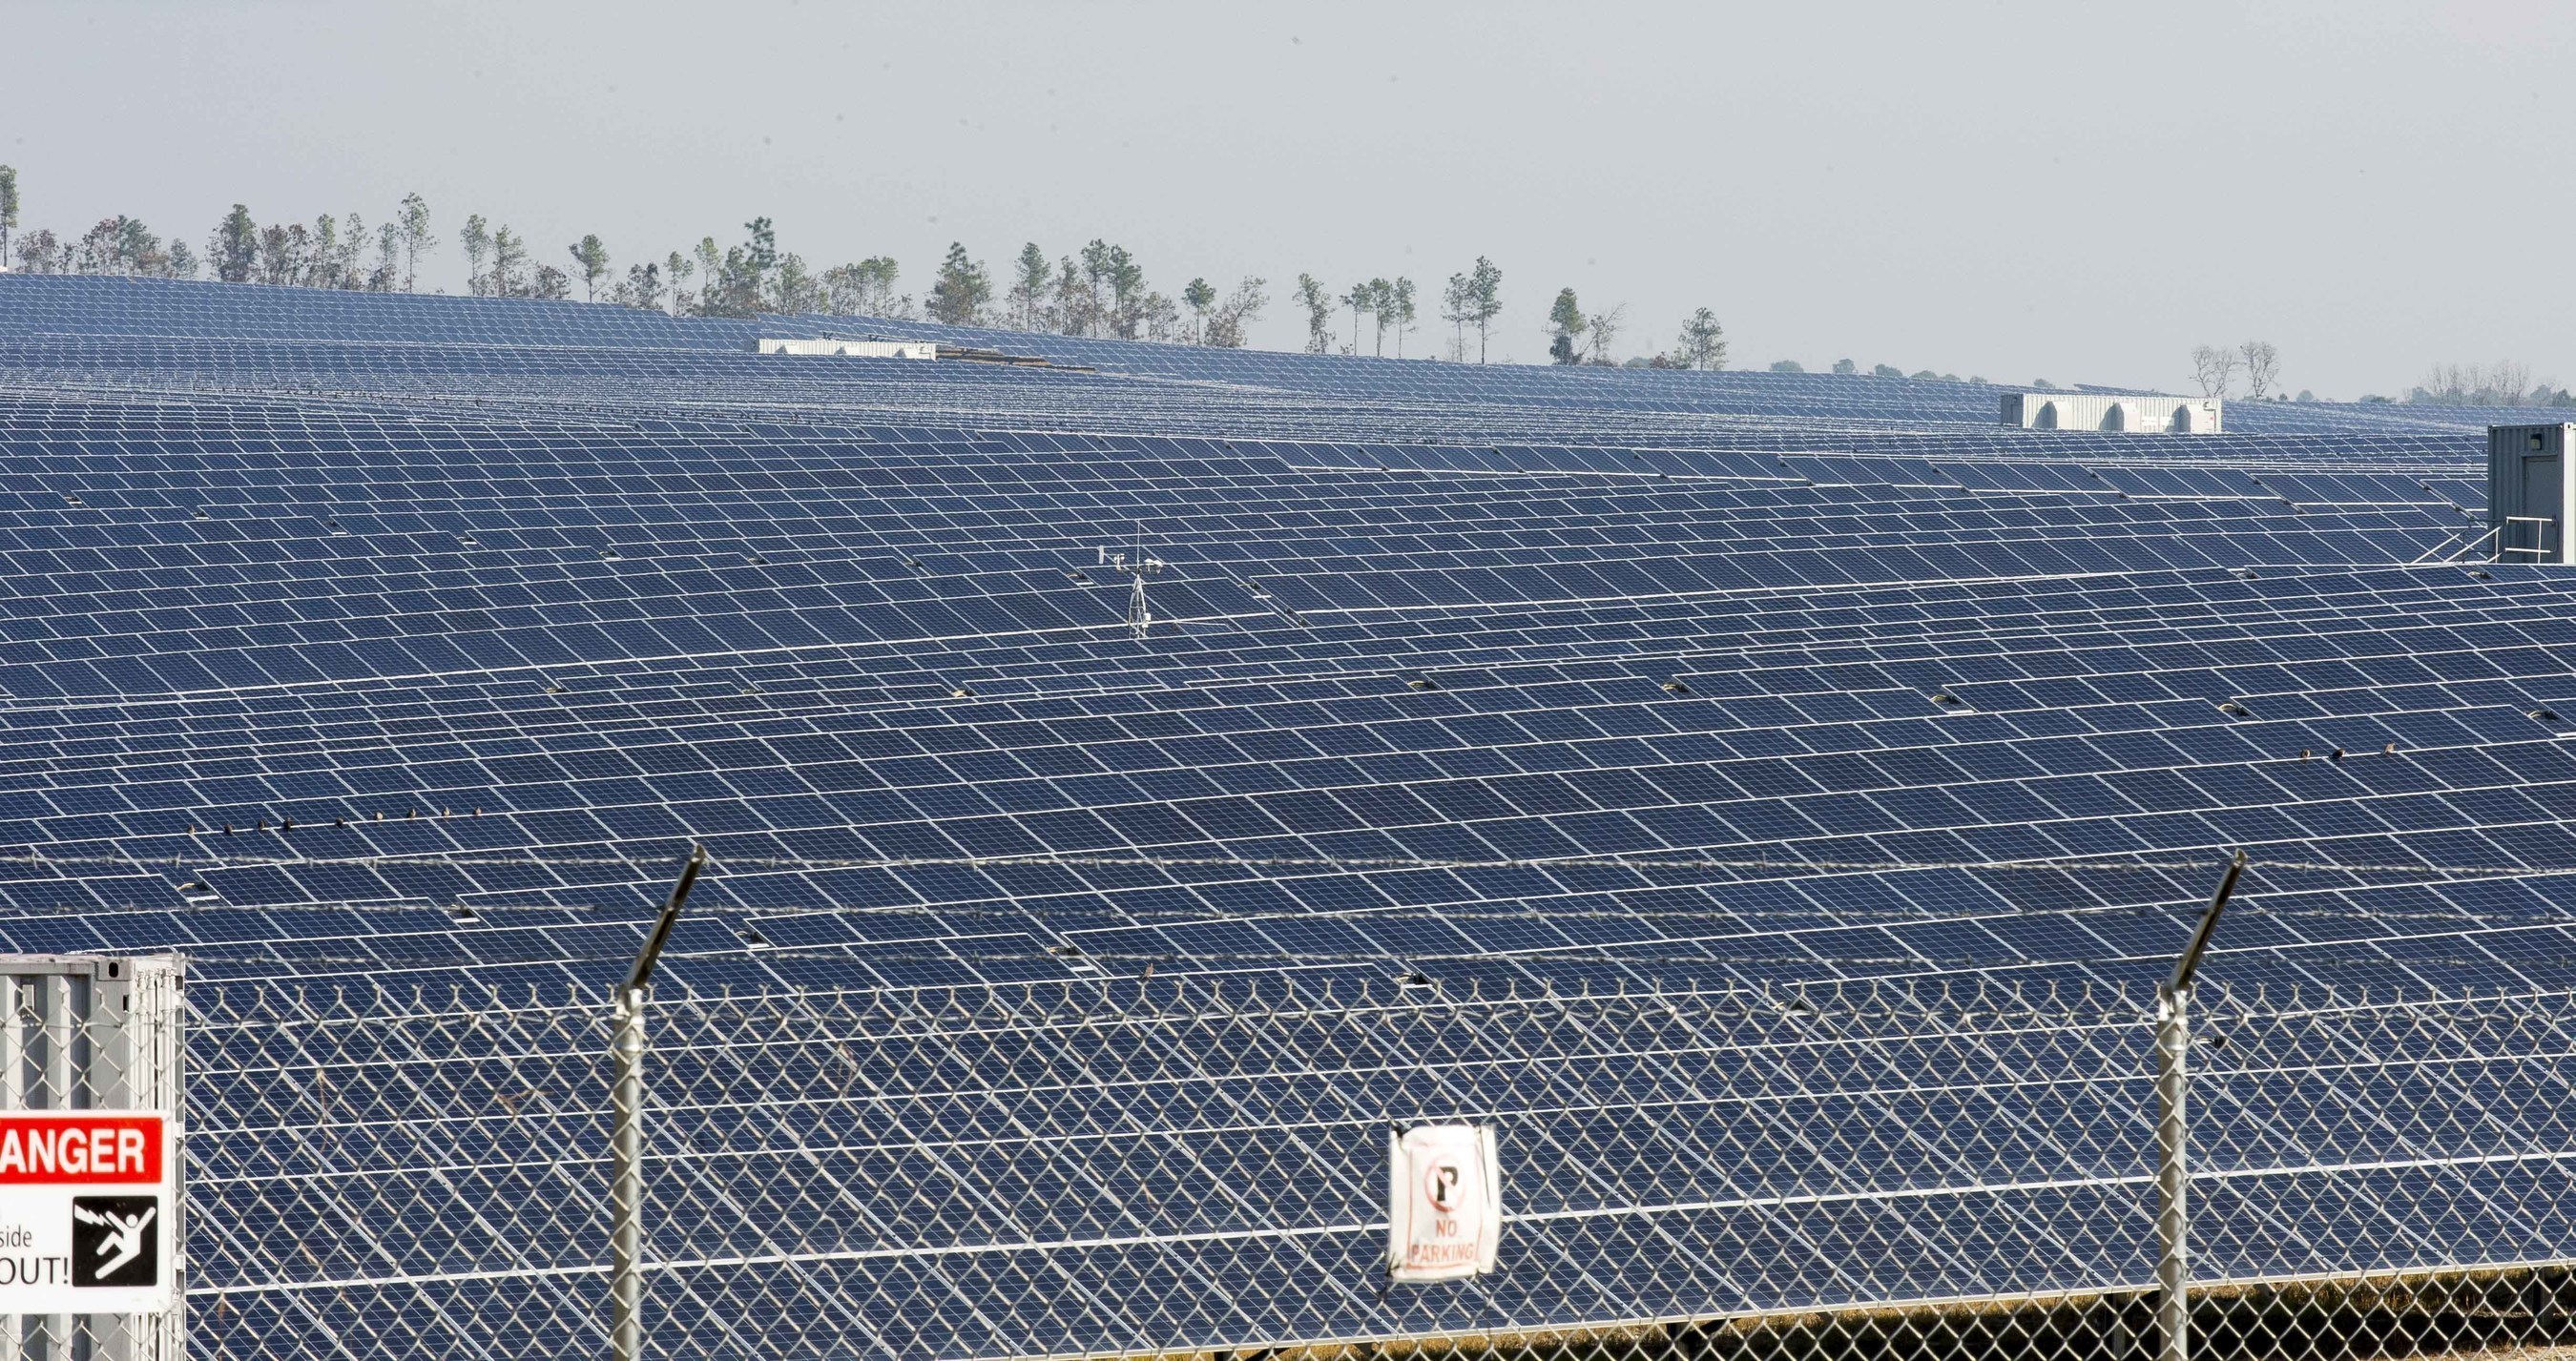 Georgia Power's new 30 MW solar facility at Fort Gordon near Augusta, Ga. occupies 270 acres, utilizes approximately 137,500 ground-mounted photovoltaic (PV) panels and is estimated to represent a $75 million investment at the installation.